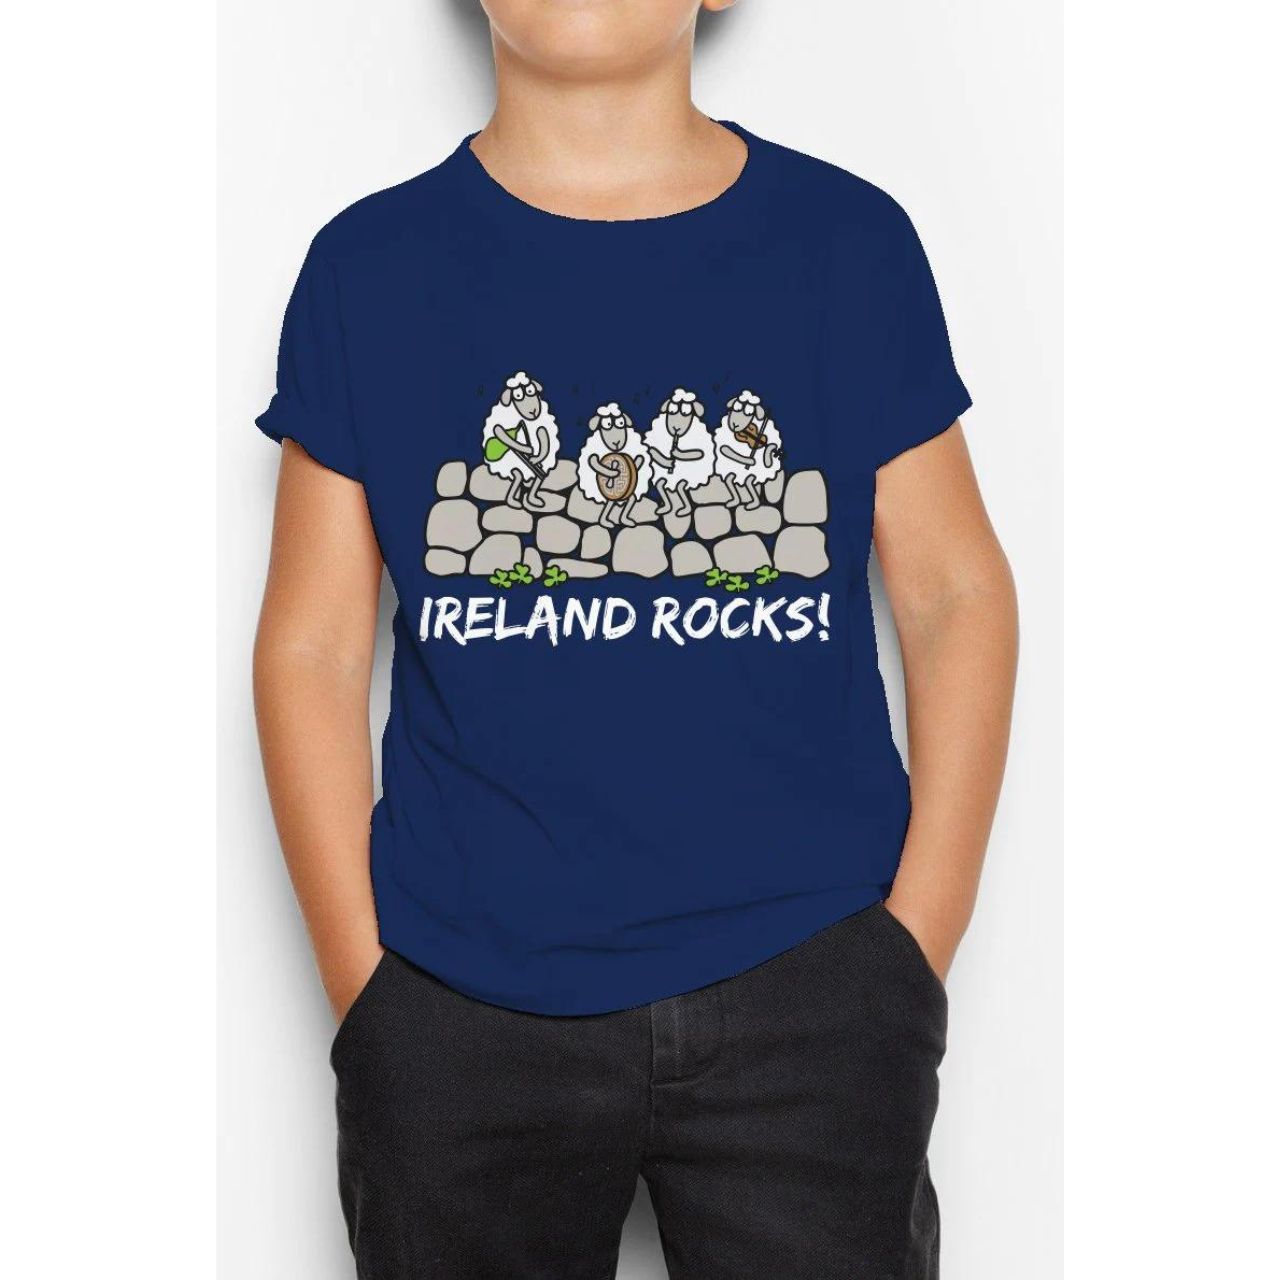 Cara Craft Navy Ireland Rocks Kids T-shirt  - 100% cotton* - Ash 99% cotton,1% polyester - Heather Grey 97% cotton, 3% polyester - Crew Neck - Designed And Printed in Ireland By Cara craft - Machine Washable